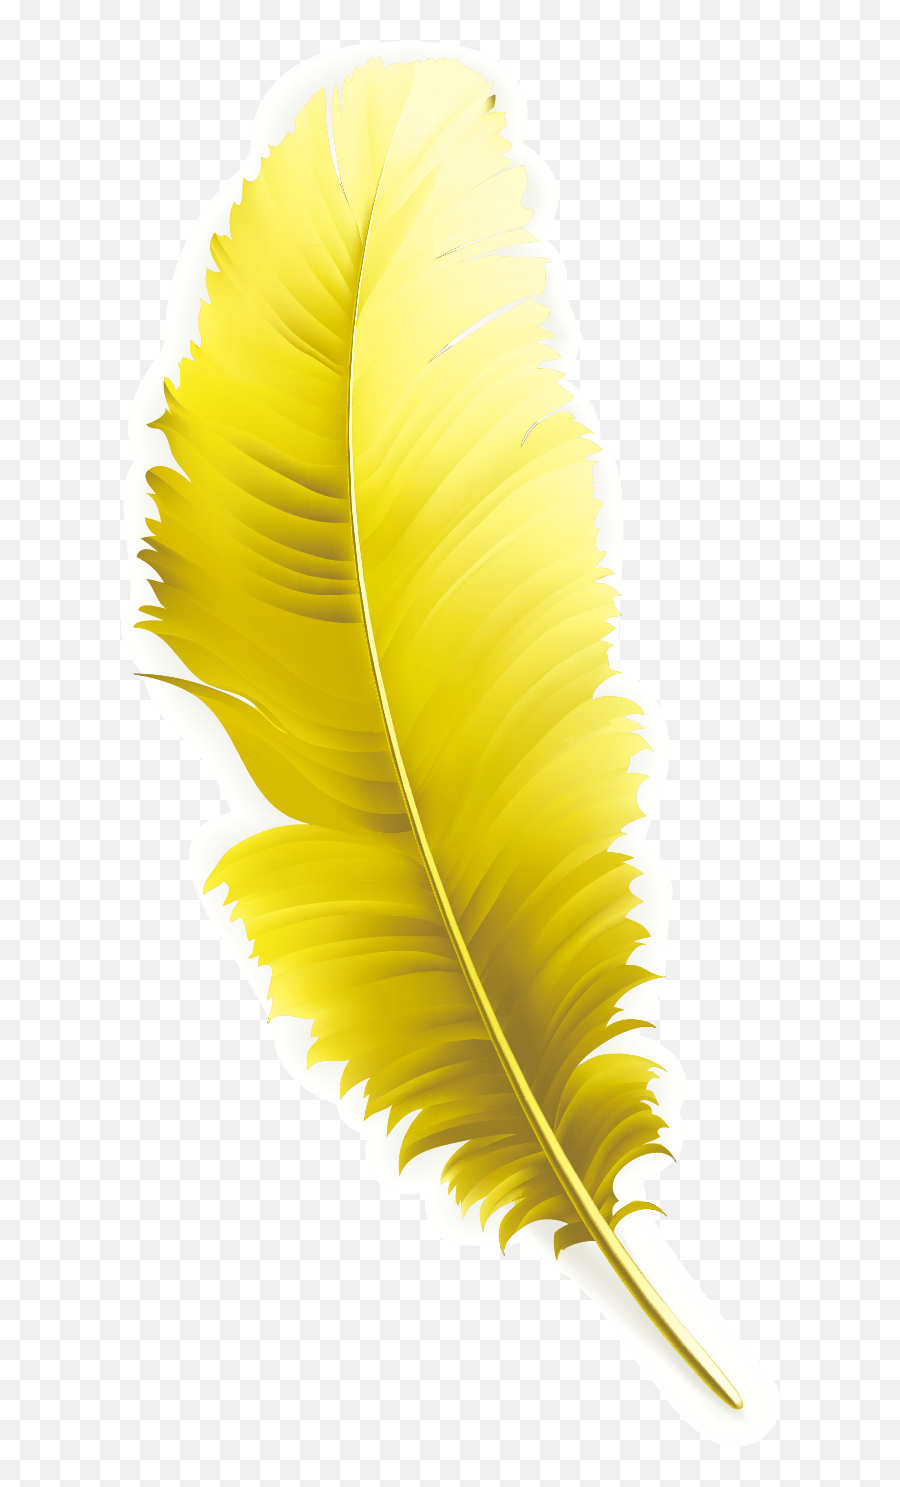 Feather Yellow Computer File - Yellow Feathers Png Download Macro Photography,Feather Transparent